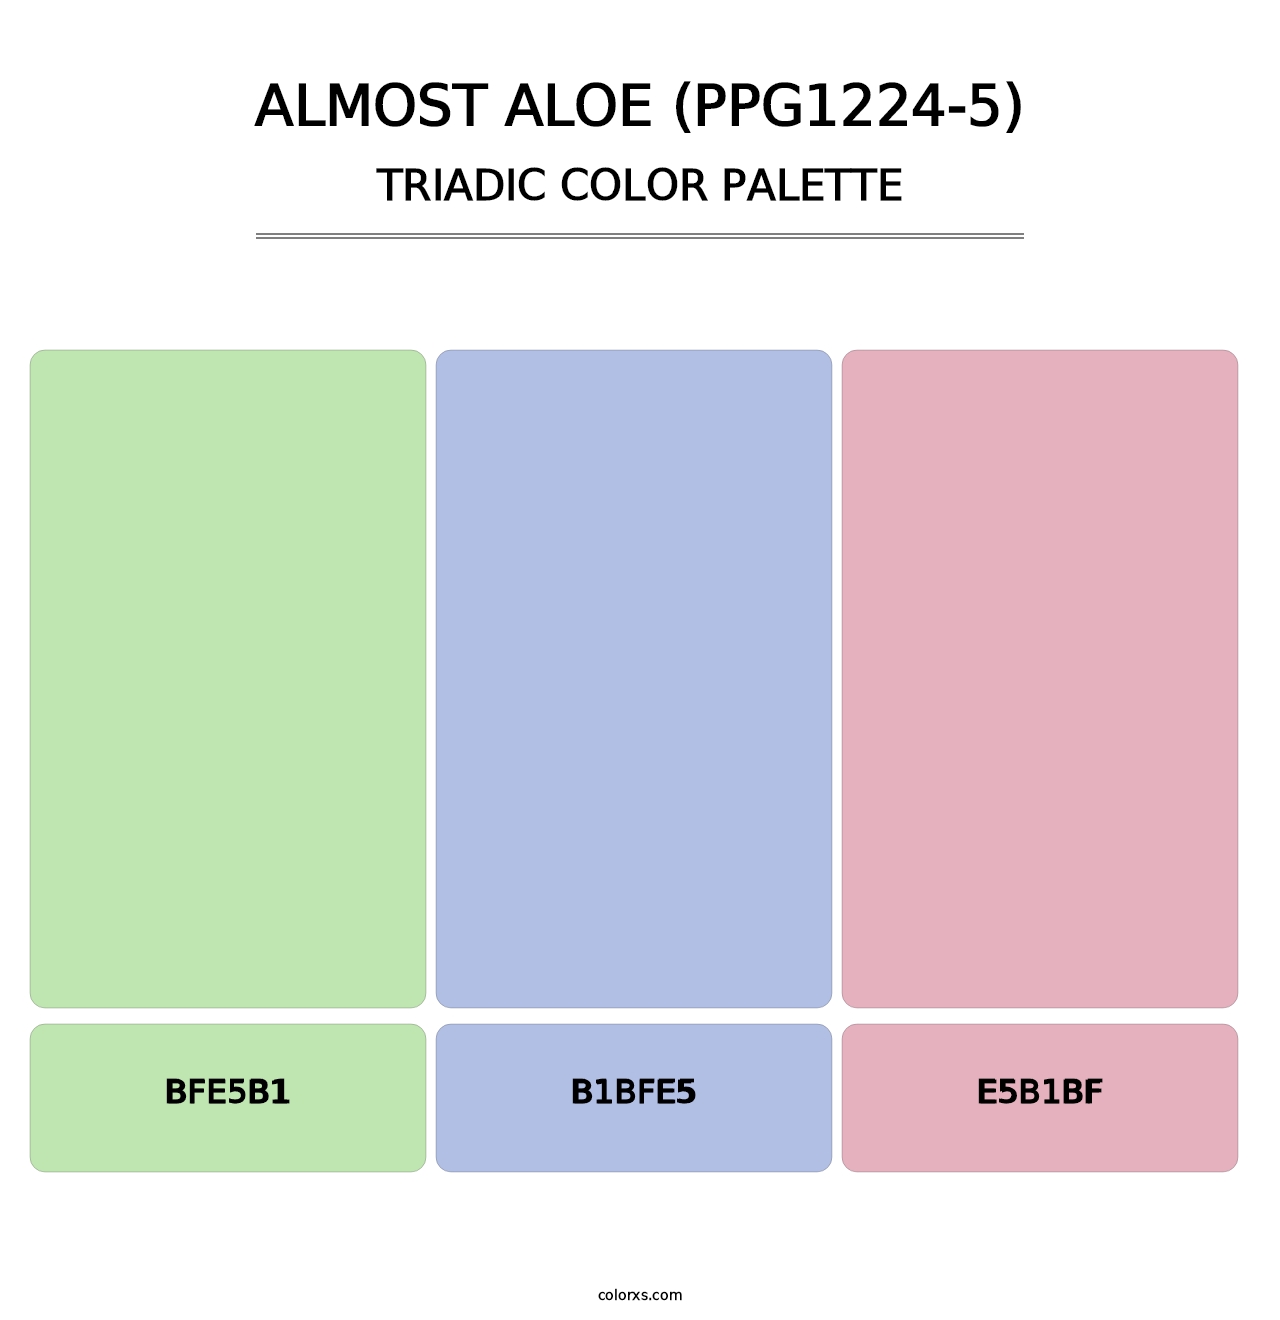 Almost Aloe (PPG1224-5) - Triadic Color Palette